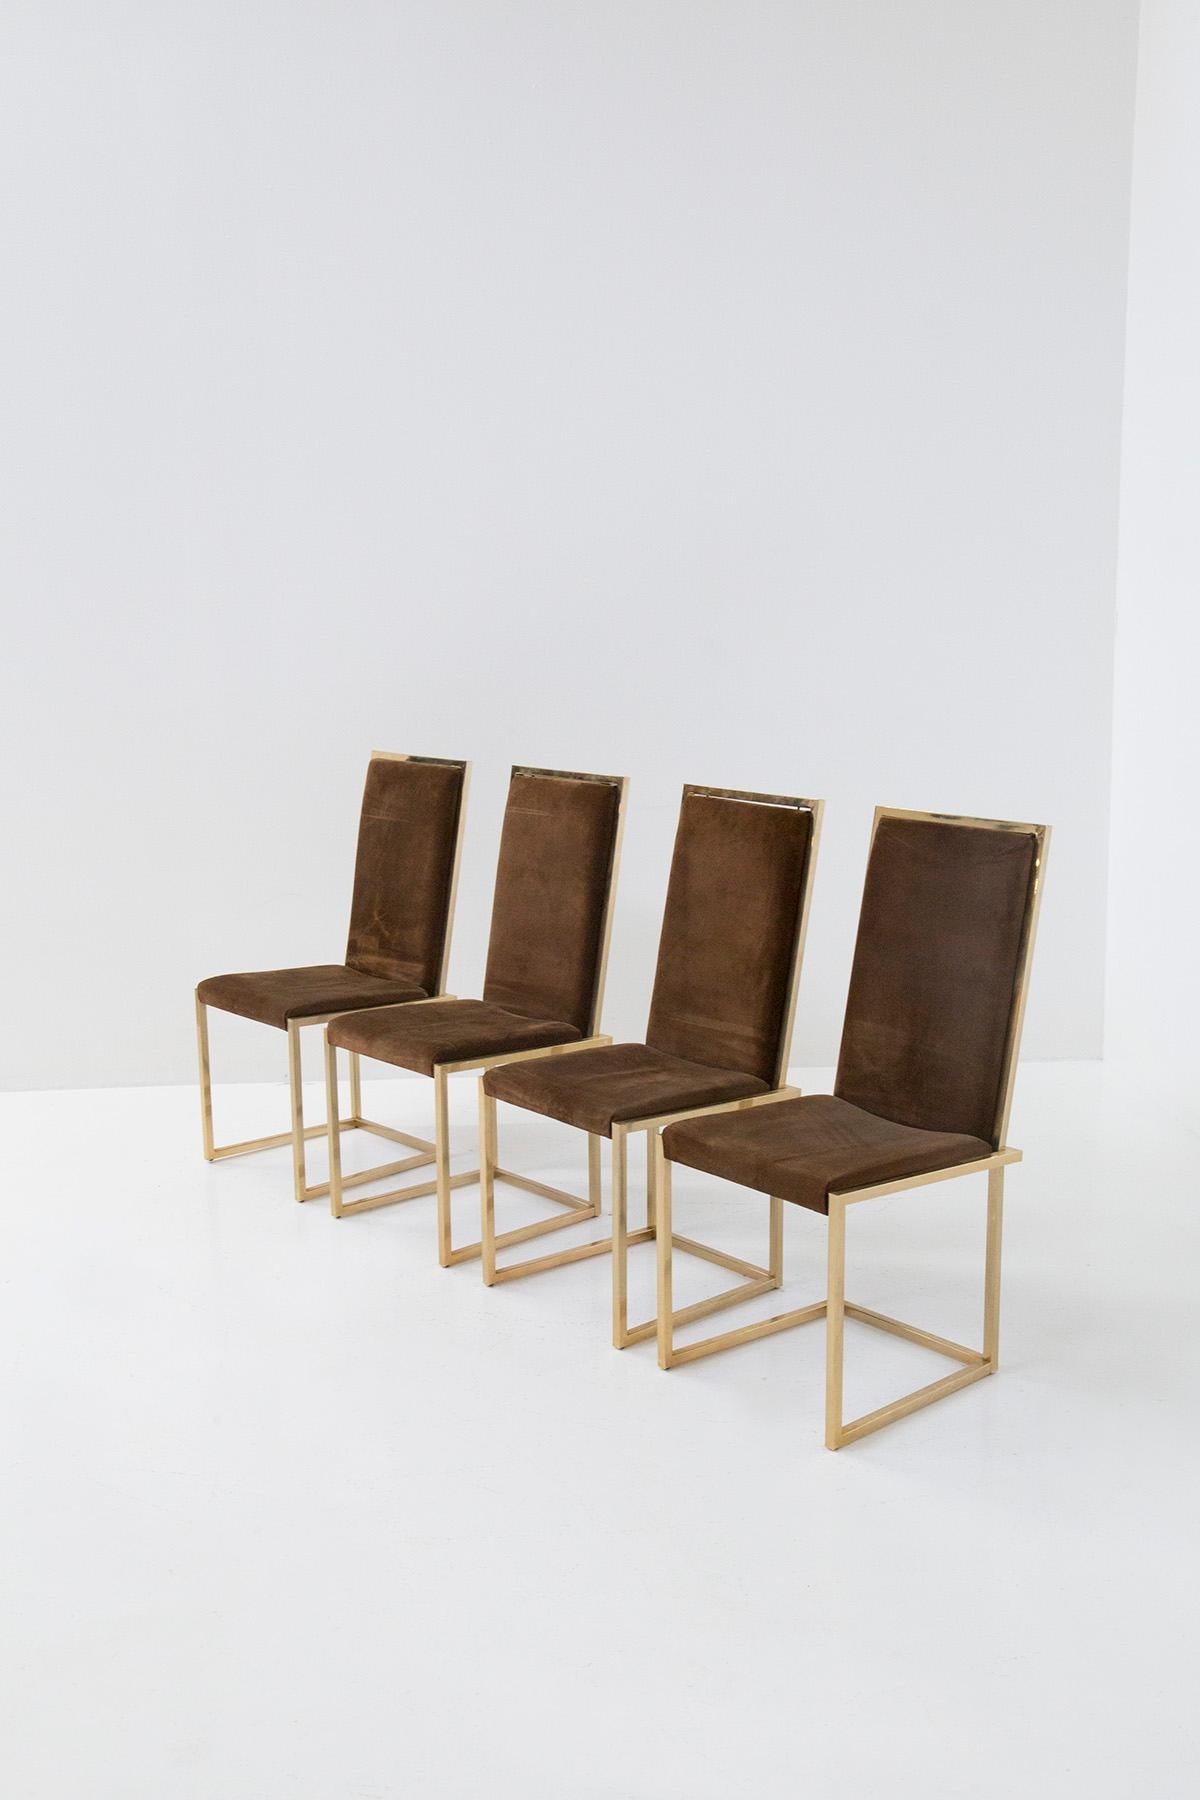 Set of four Italian chairs from the 1970s. The set is typically of 1970s design. The four chairs feature a gilded metal frame; in fact, the frame is made of tubular metal that outlines the shape of the seat. Its lines are very clean and sharp and